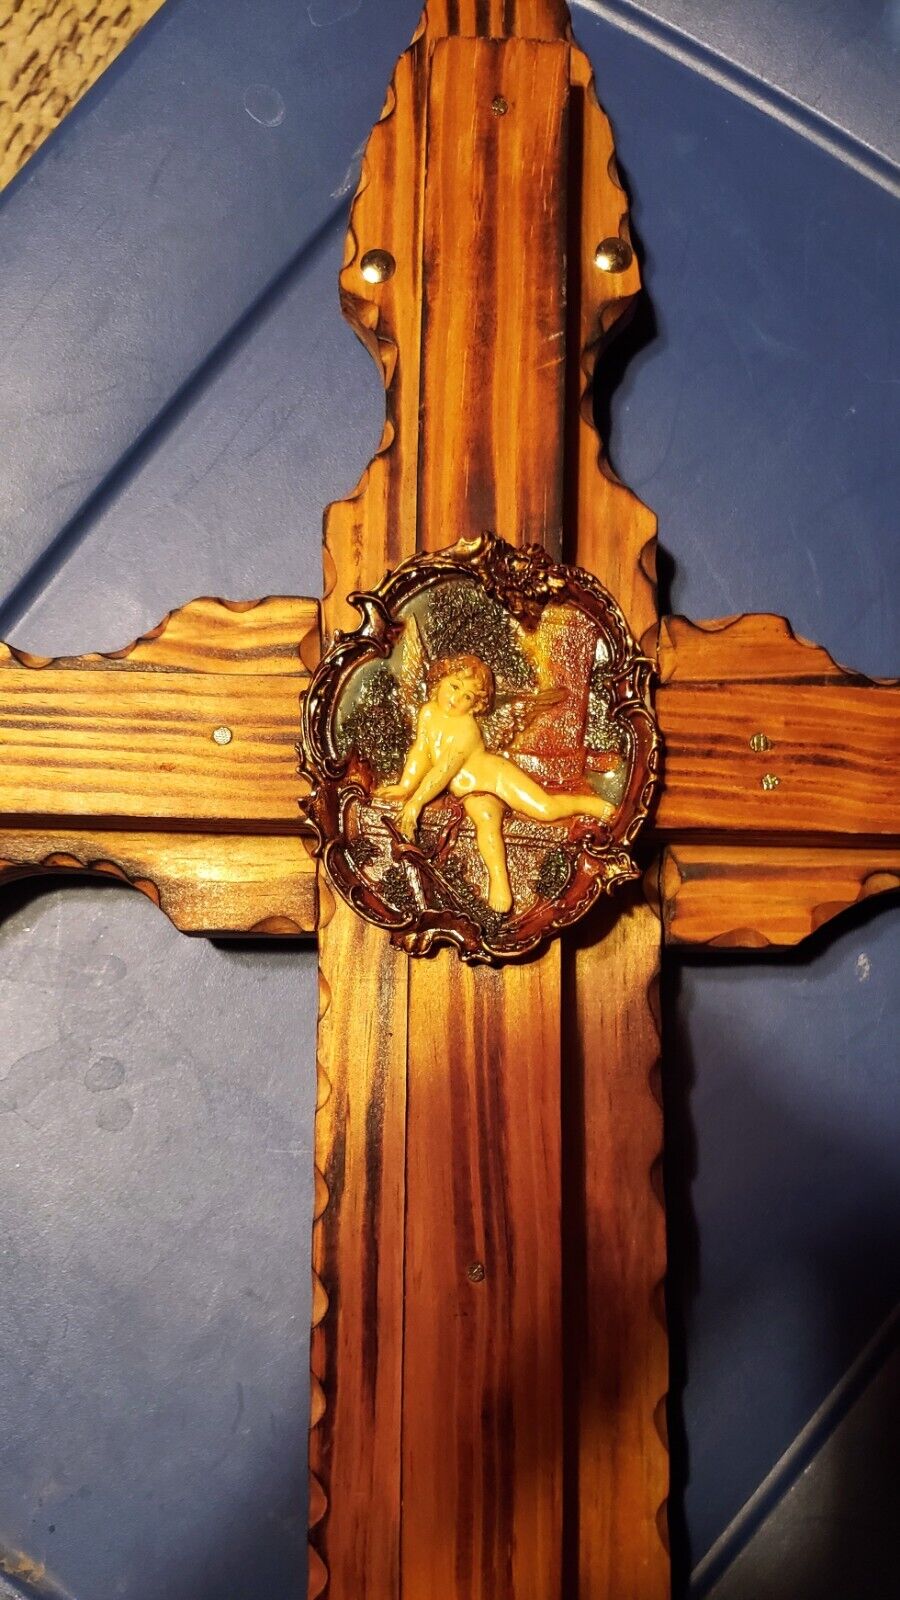 Handcrafted Large Cross With Child Angel Emblem Placed In Middle